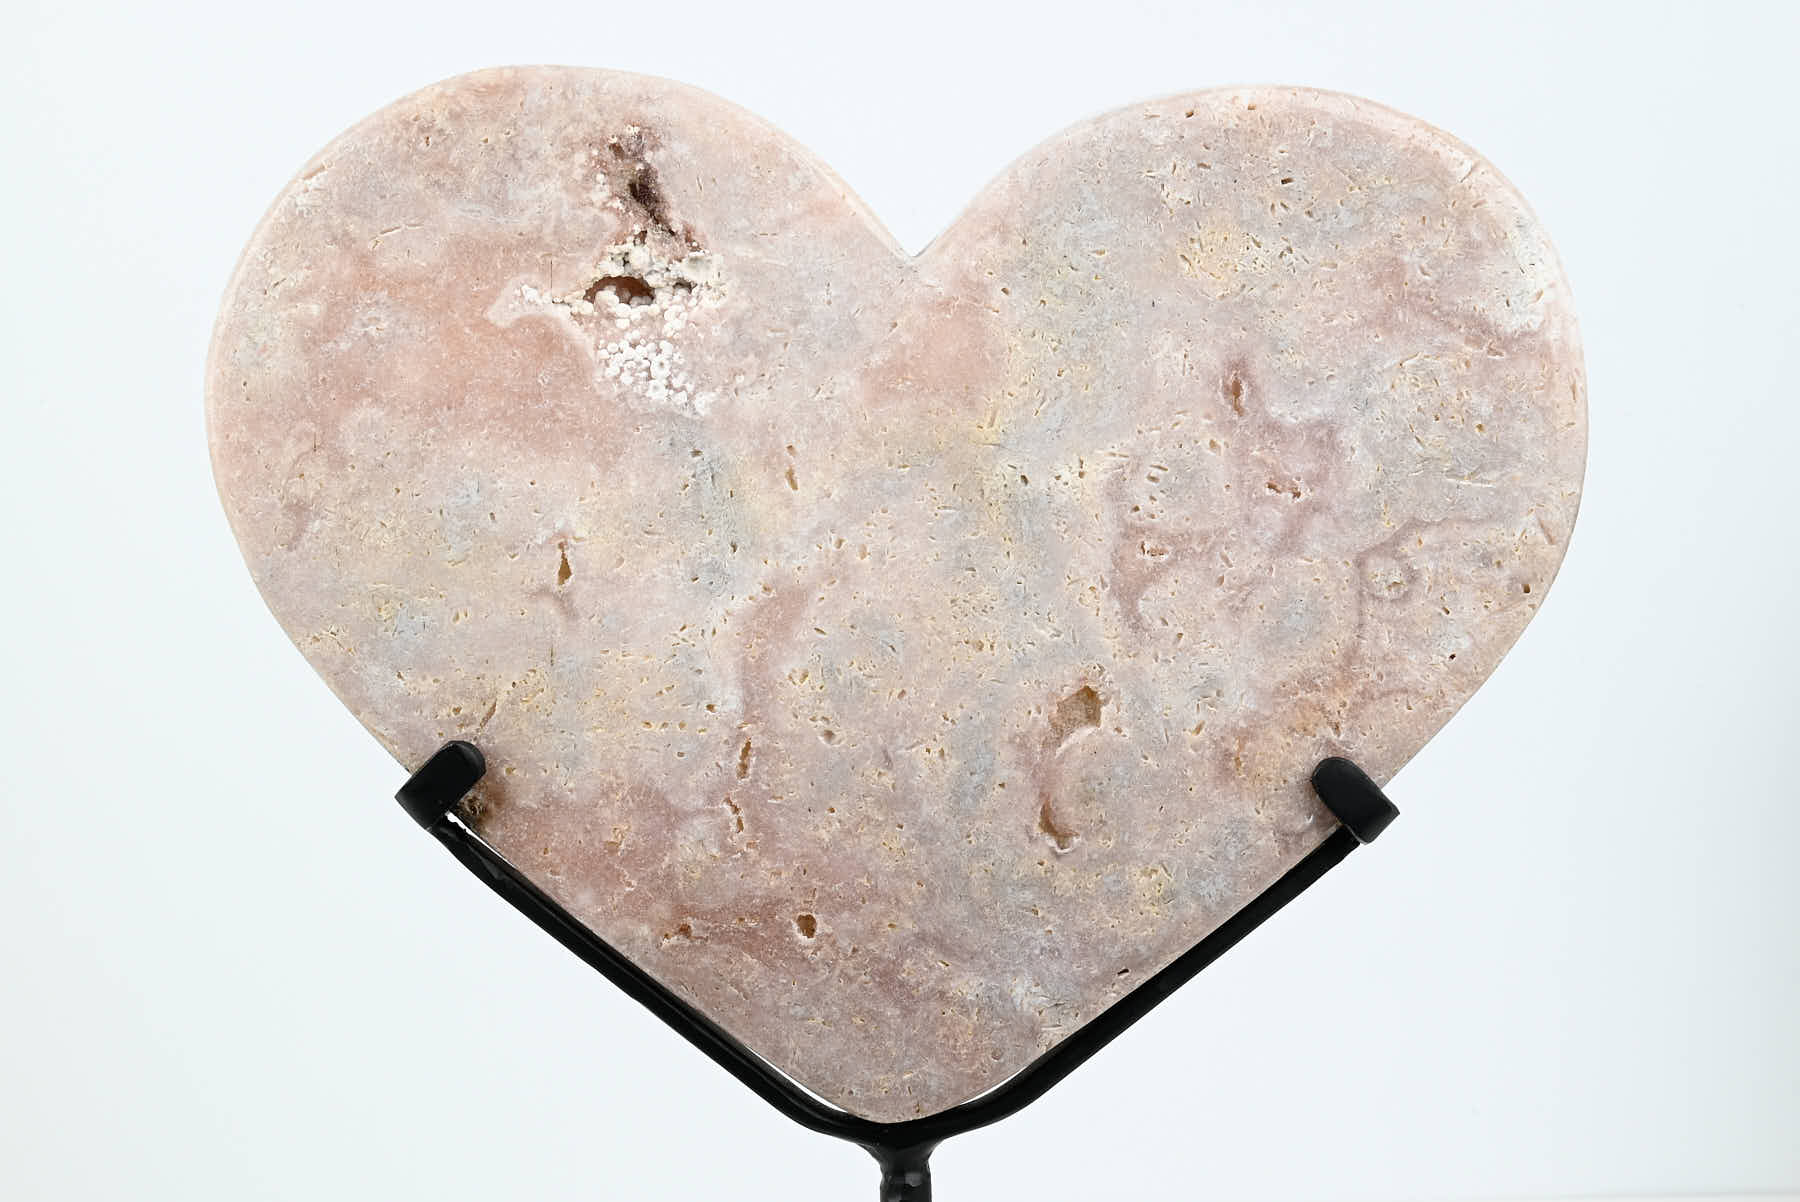 Extra Quality Pink Amethyst Heart - 2.56kg, 27cm high - #HTPINK-34019